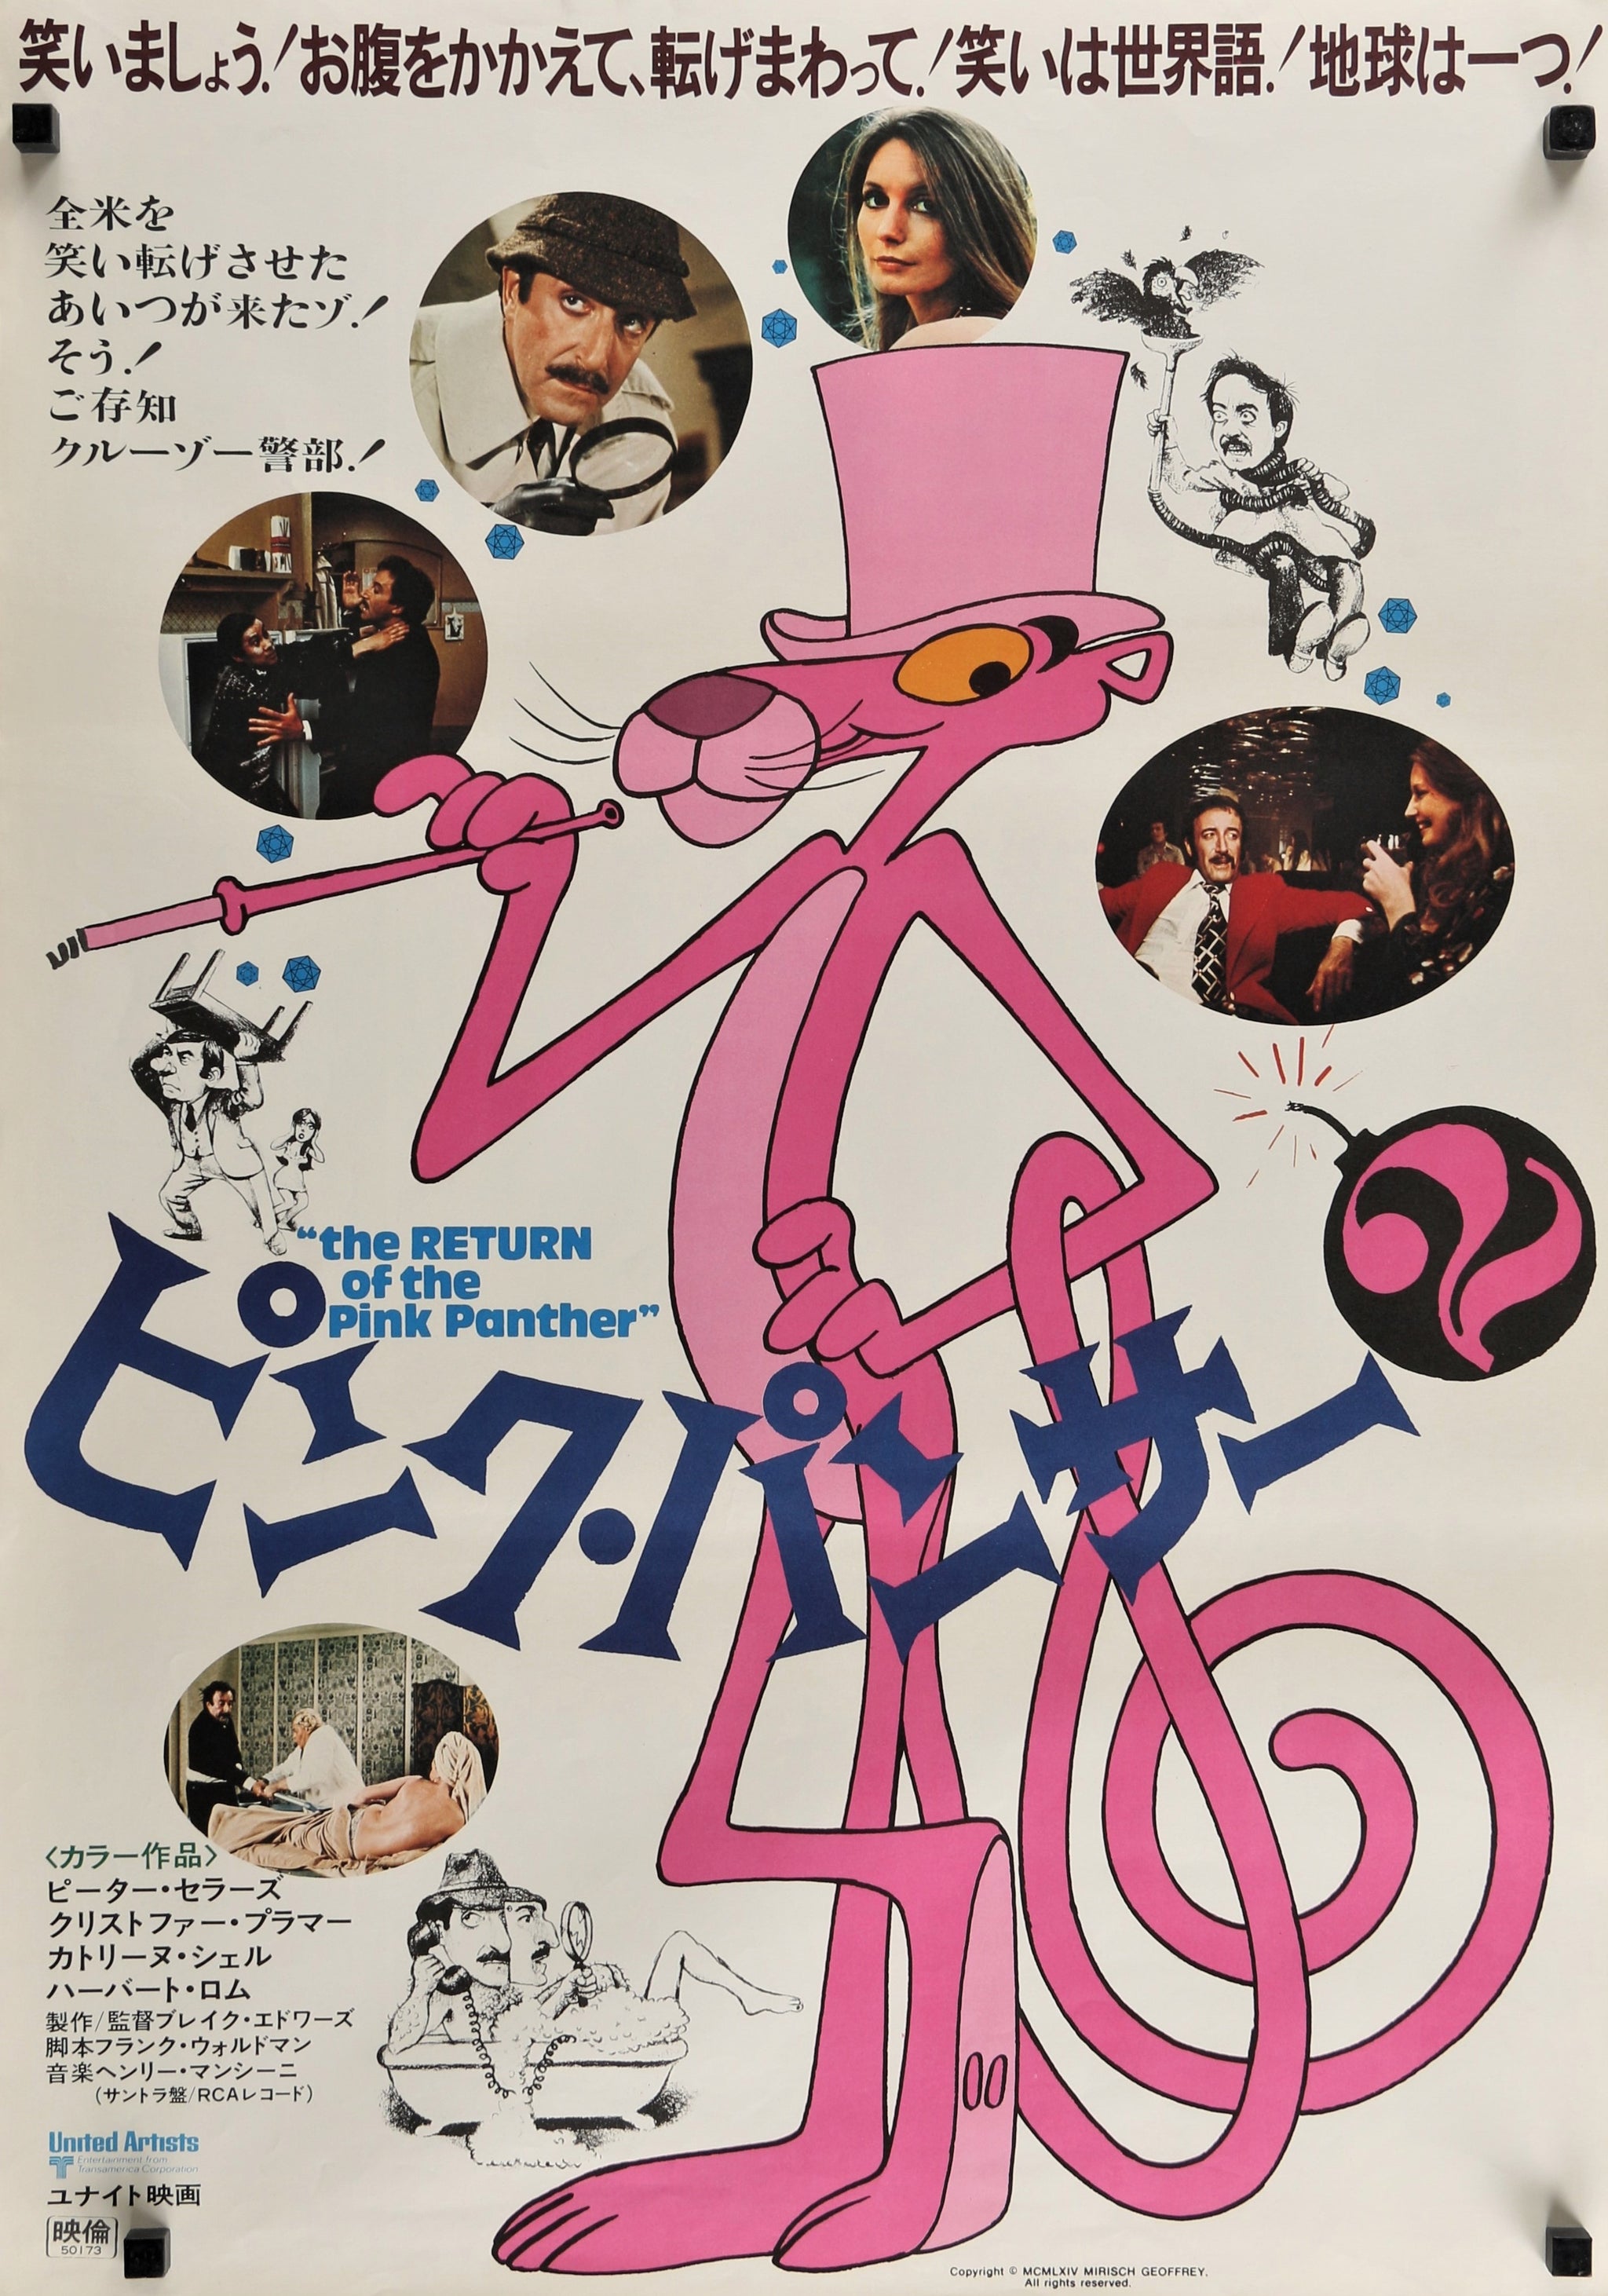 It took more than 100 different character designs to perfect The Pink  Panther